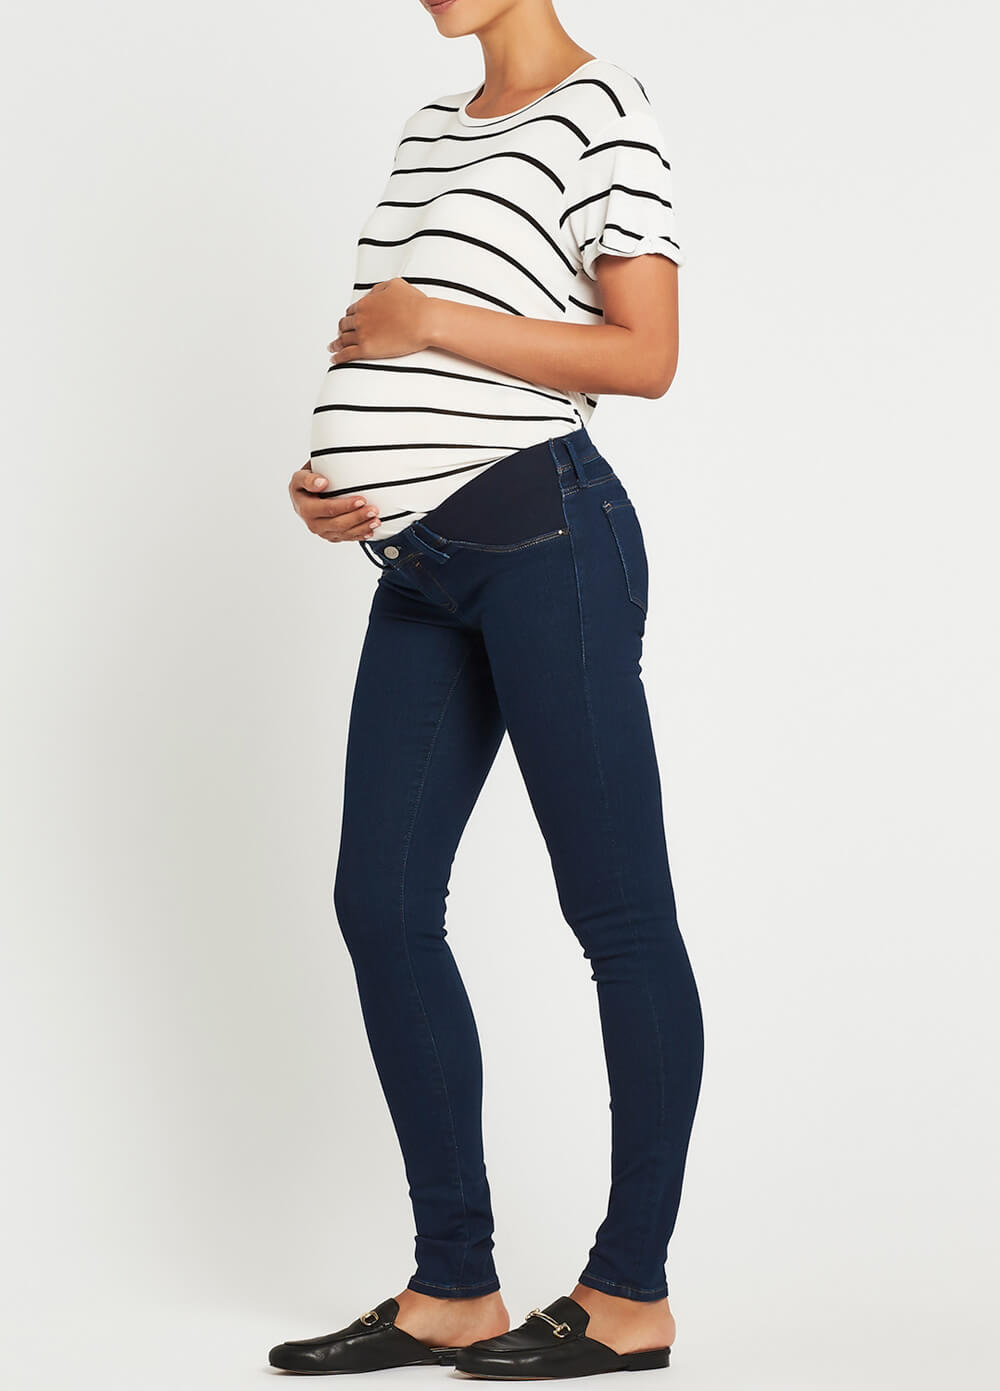 Reina Shaded Rinse Gold Lux Move Skinny Maternity Jeans by Mavi